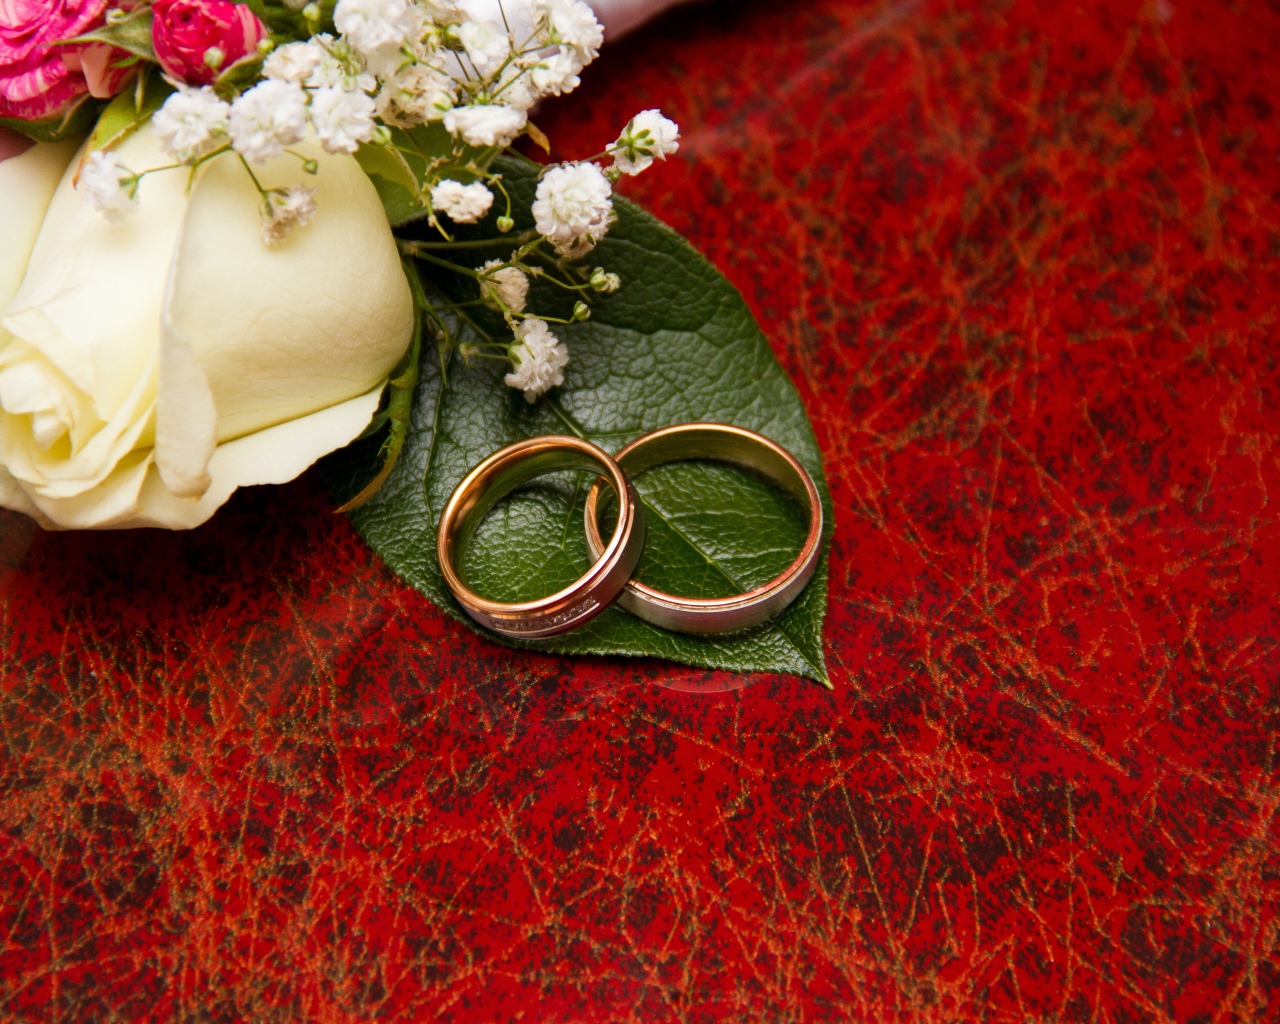 Gold wedding rings on a red background